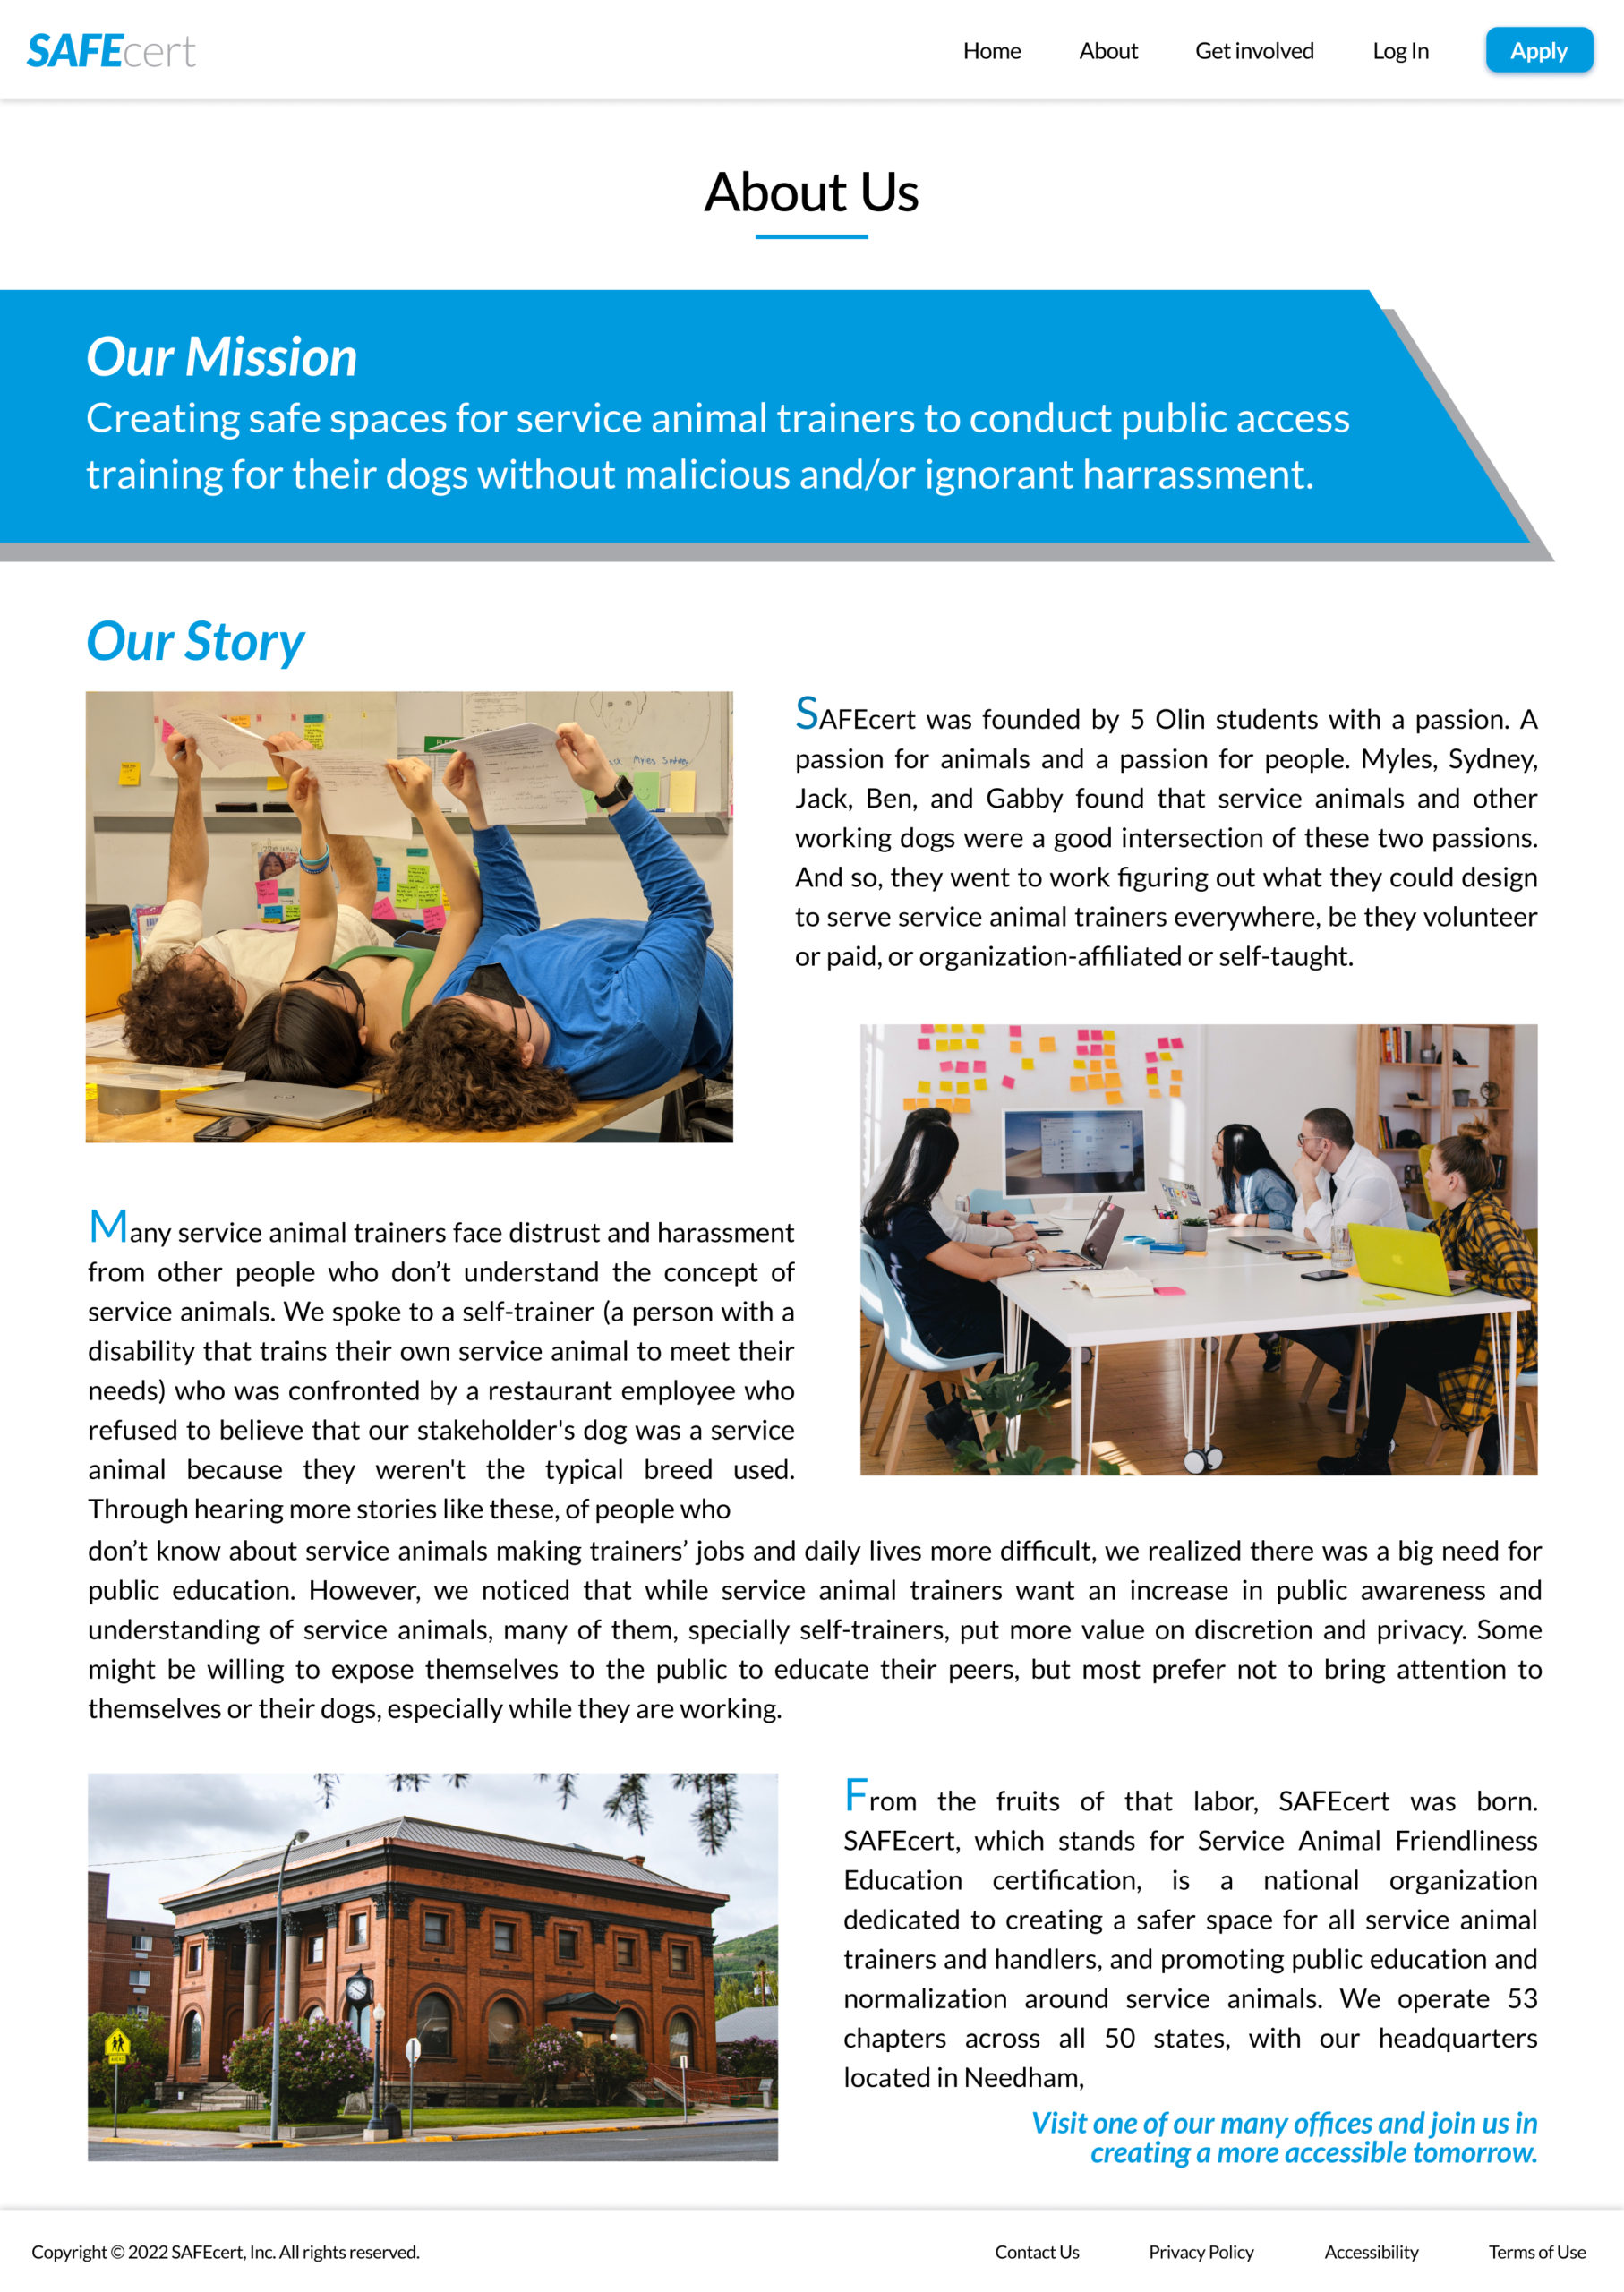 About Us page of the safecert website. Blue shape at the top with white mission statement, Text explaining the story of how the organization was founded. A photo of part of the team lying on a table, stock photo of a team, and a old building with interesting architecture